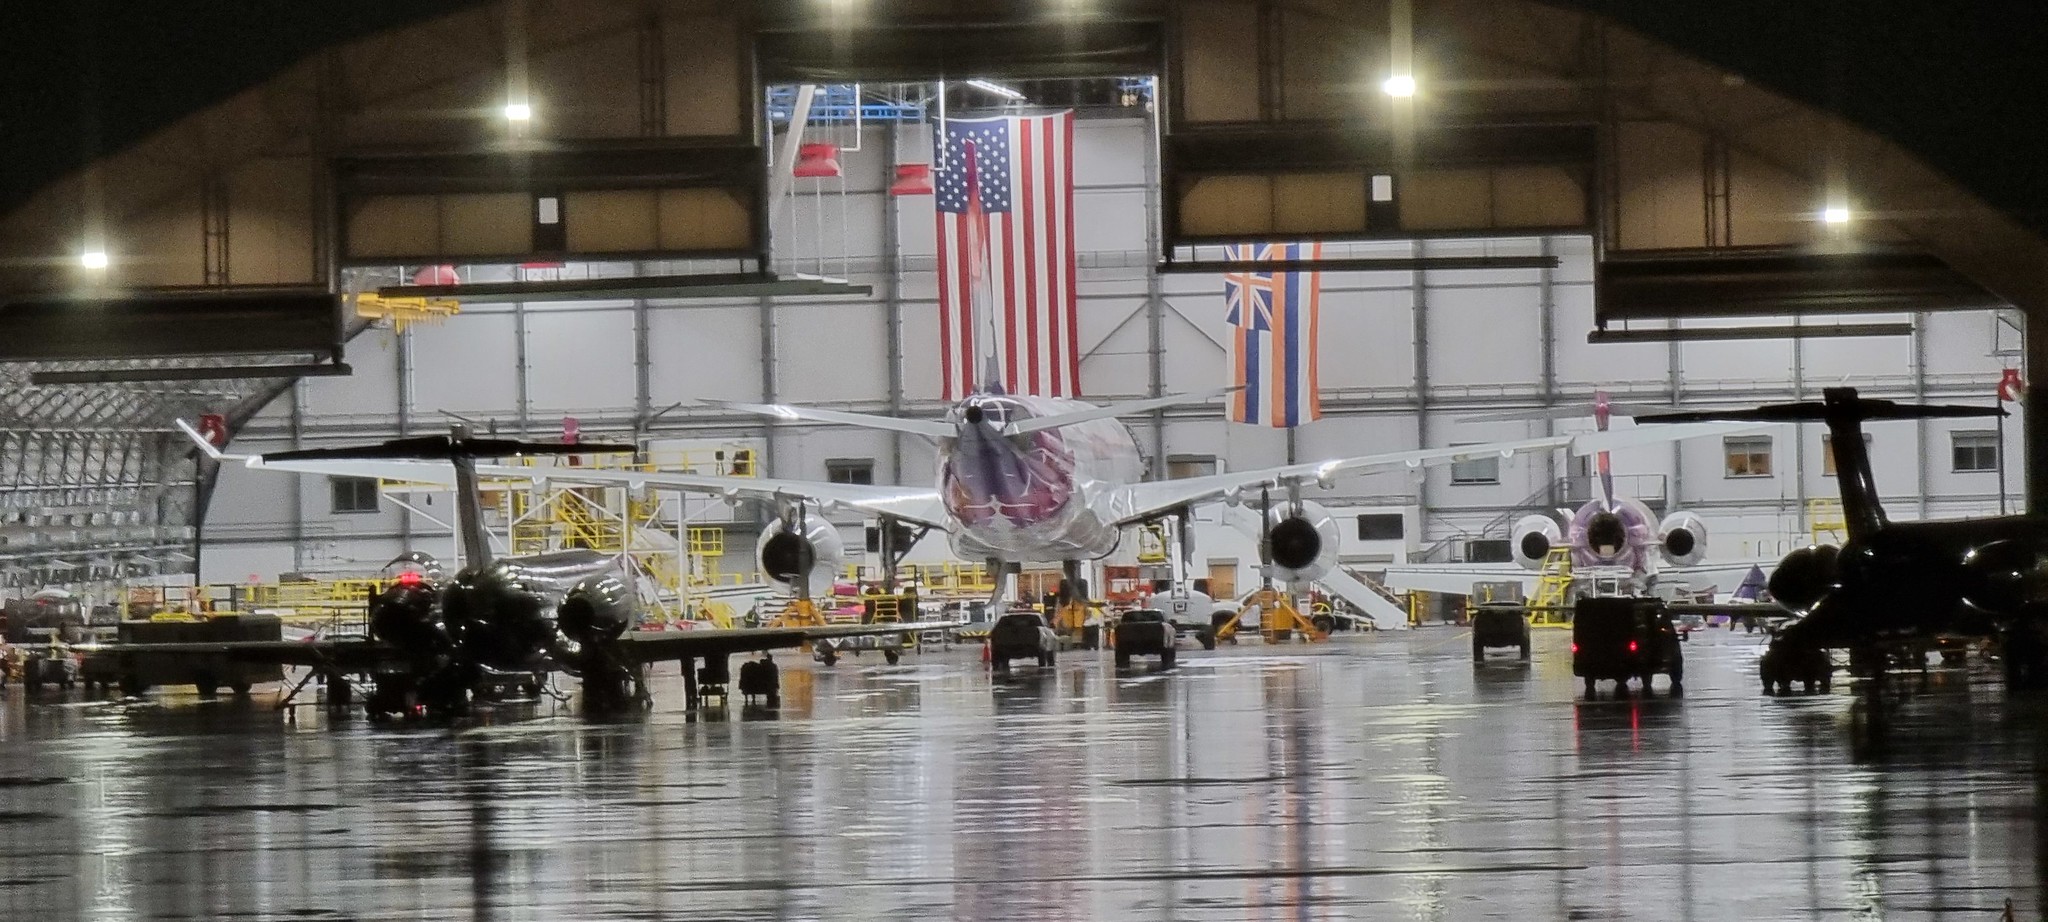 A view of a proud American aircraft hangar at Honolulu airport